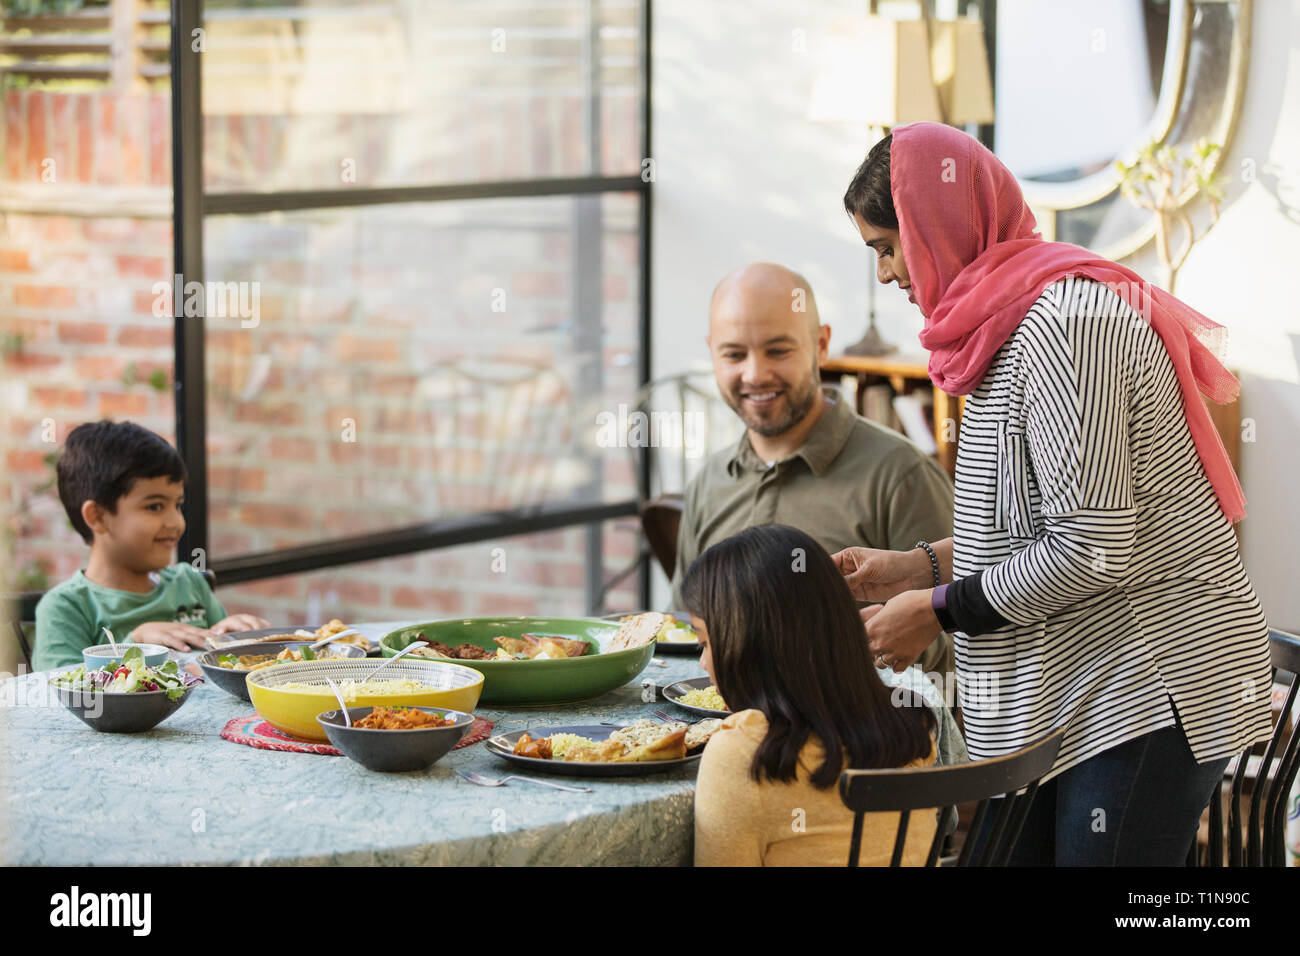 Mother in hijab serving dinner to family at dining table Stock Photo